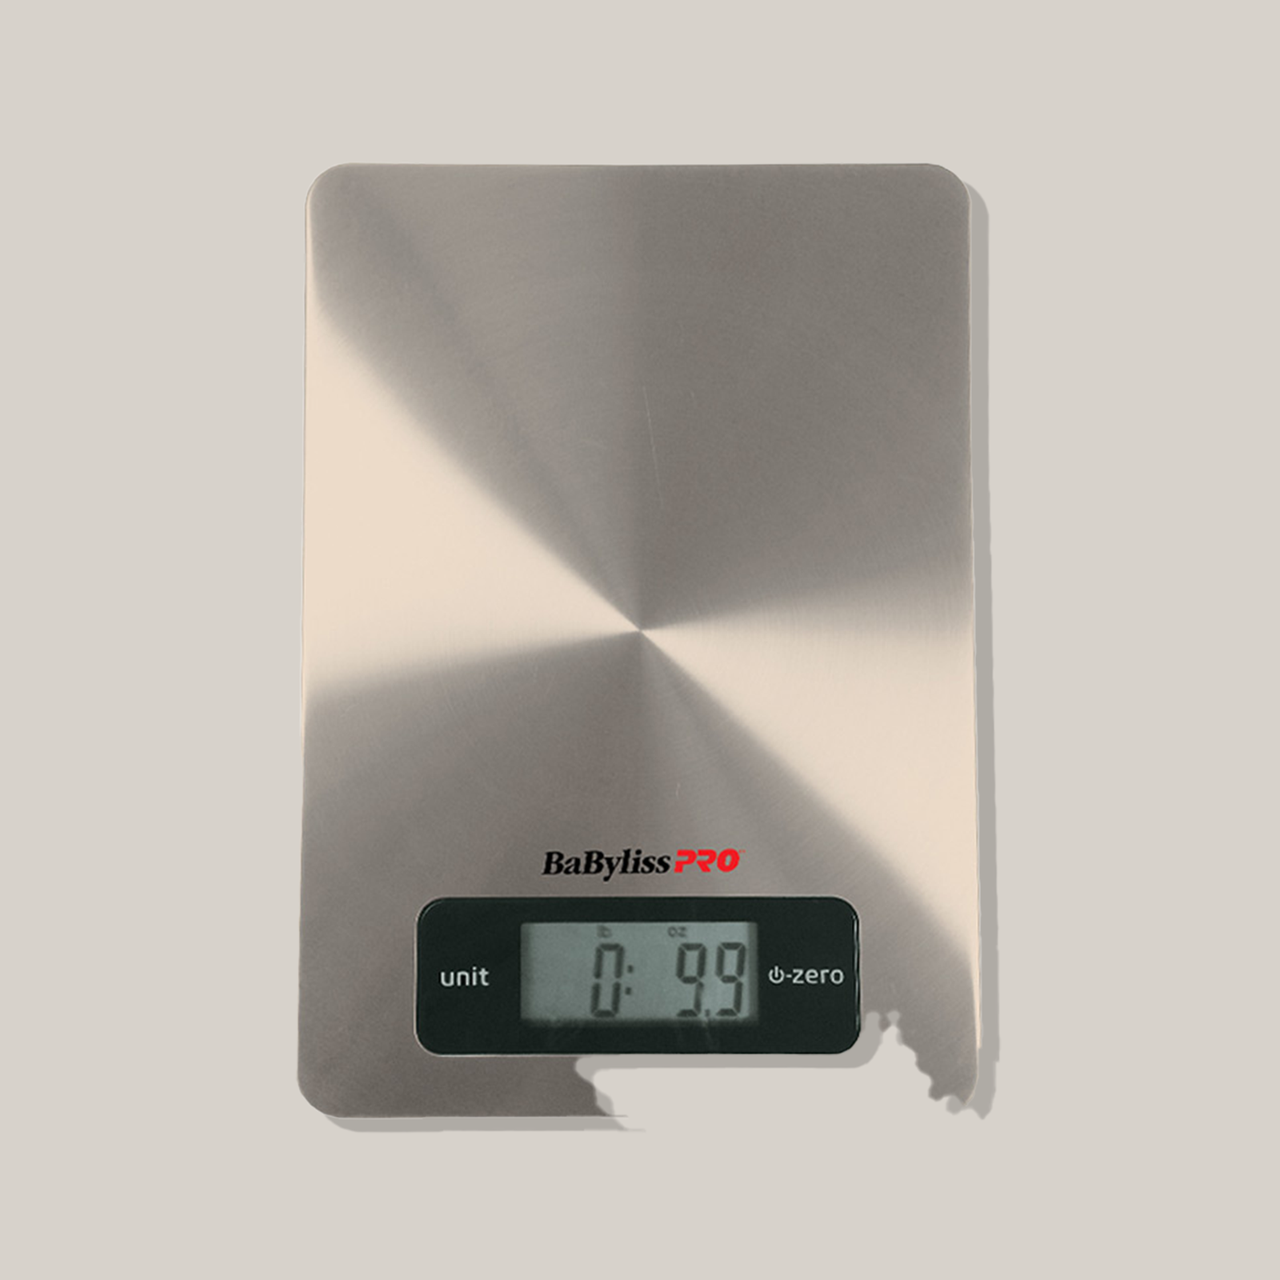 Babylisspro Stainless steel digital scale #BESSCALE2UCC 